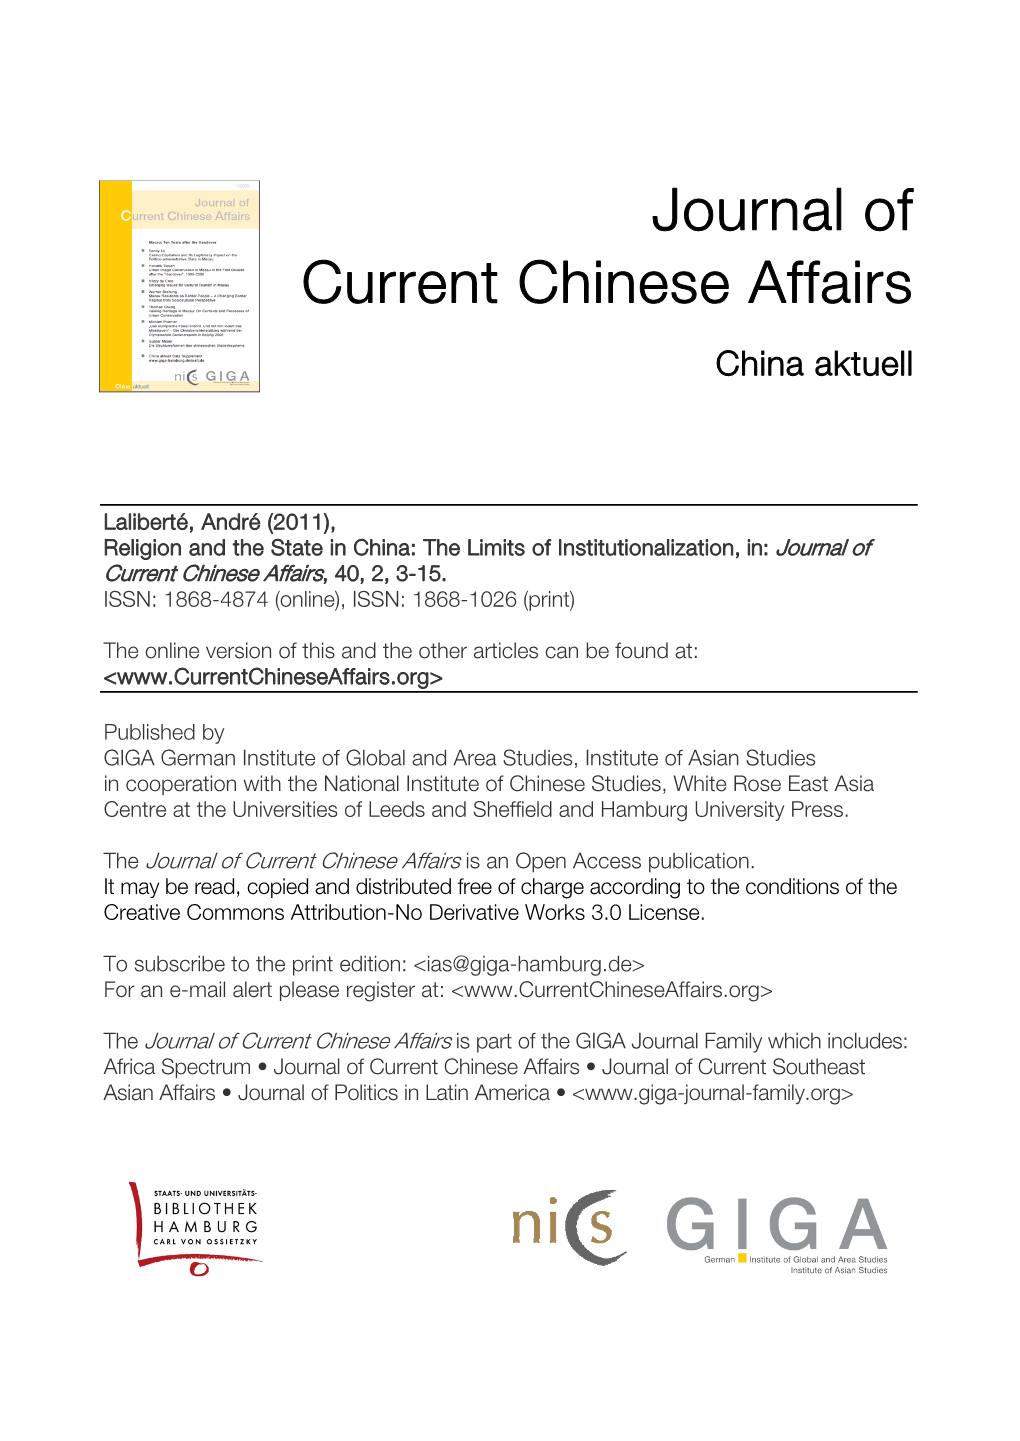 Religion and the State in China: the Limits of Institutionalization, In: Journal of Current Chinese Affairs, 40, 2, 3-15